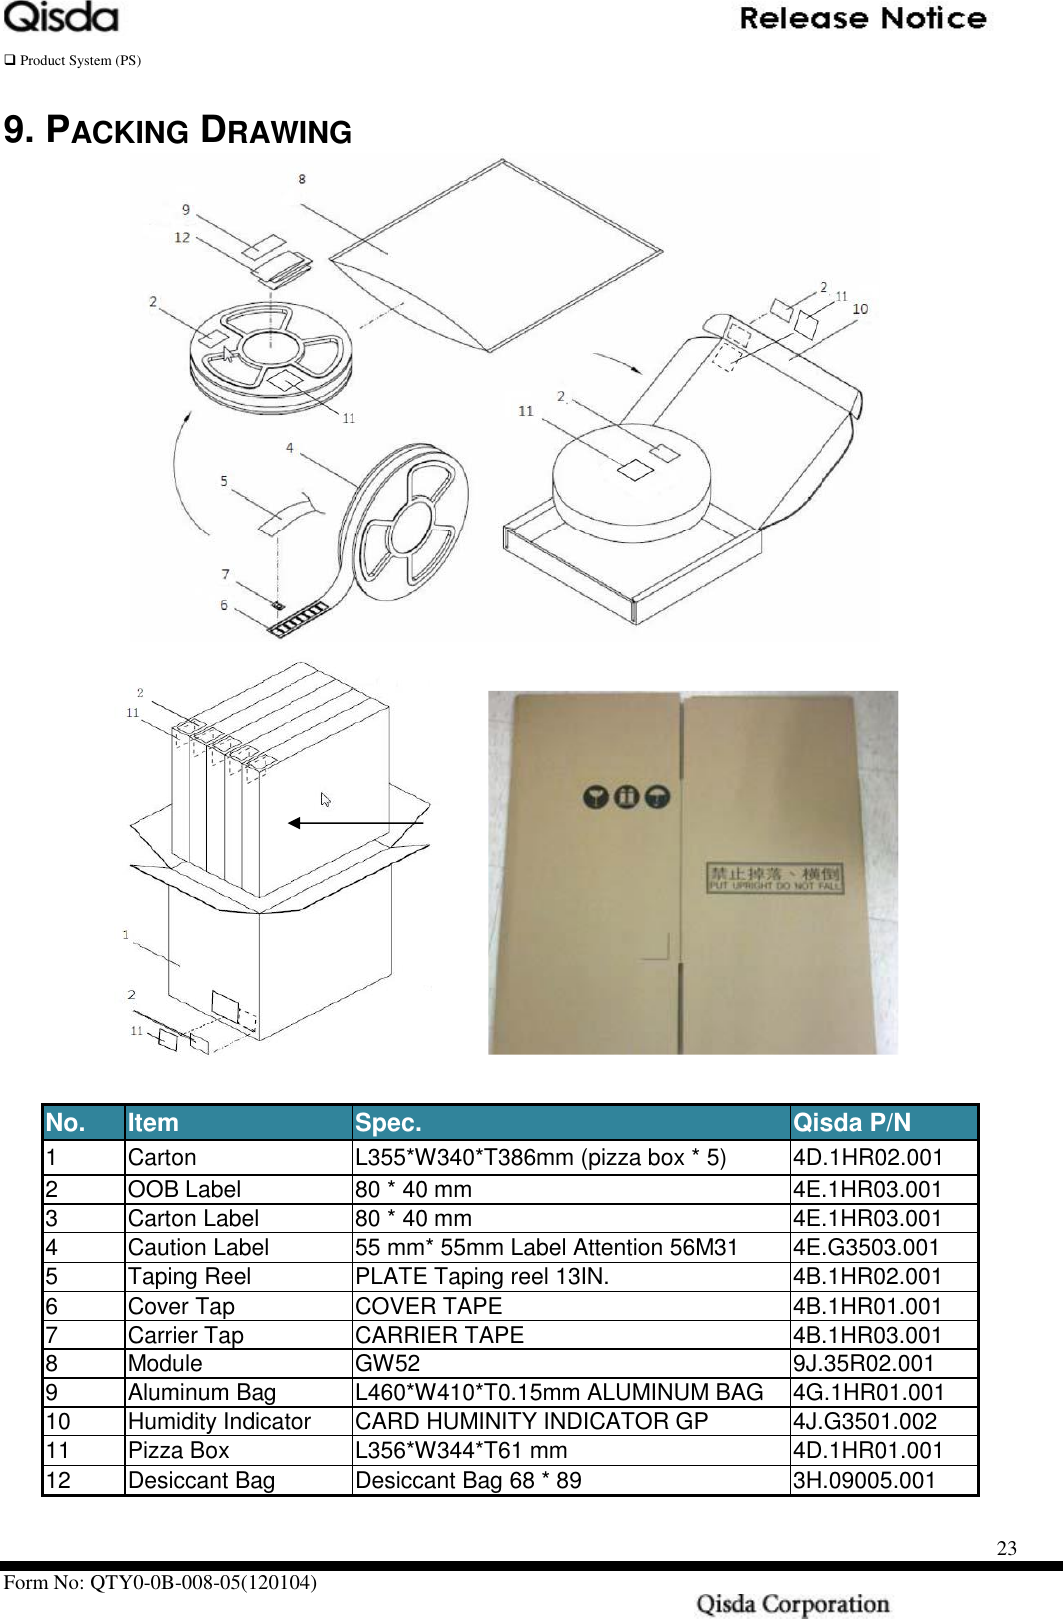   Product System (PS)      Form No: QTY0-0B-008-05(120104)                                                    23 9. PACKING DRAWING        No. Item Spec. Qisda P/N 1 Carton L355*W340*T386mm (pizza box * 5) 4D.1HR02.001 2 OOB Label 80 * 40 mm 4E.1HR03.001 3 Carton Label 80 * 40 mm   4E.1HR03.001 4 Caution Label 55 mm* 55mm Label Attention 56M31 4E.G3503.001 5 Taping Reel PLATE Taping reel 13IN. 4B.1HR02.001 6 Cover Tap COVER TAPE 4B.1HR01.001 7 Carrier Tap CARRIER TAPE 4B.1HR03.001 8 Module GW52 9J.35R02.001 9 Aluminum Bag L460*W410*T0.15mm ALUMINUM BAG 4G.1HR01.001 10 Humidity Indicator CARD HUMINITY INDICATOR GP 4J.G3501.002 11 Pizza Box L356*W344*T61 mm 4D.1HR01.001 12 Desiccant Bag Desiccant Bag 68 * 89 3H.09005.001 